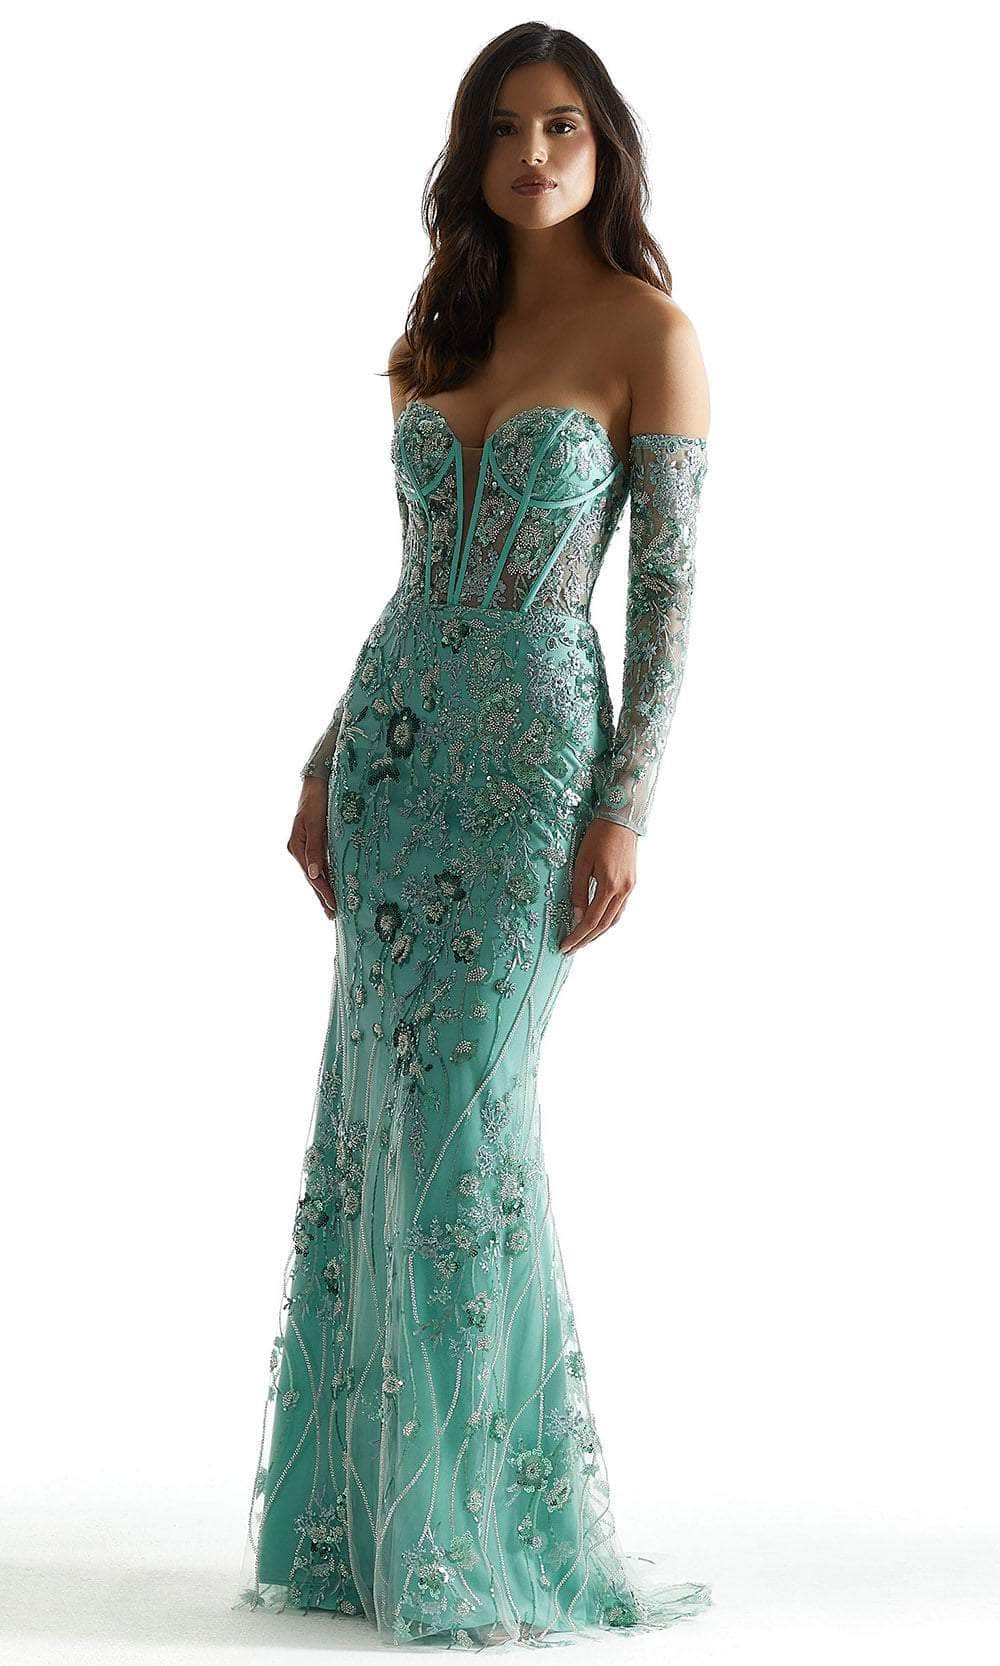 Image of Mori Lee 49002 - Sequin Pattern Prom Dress